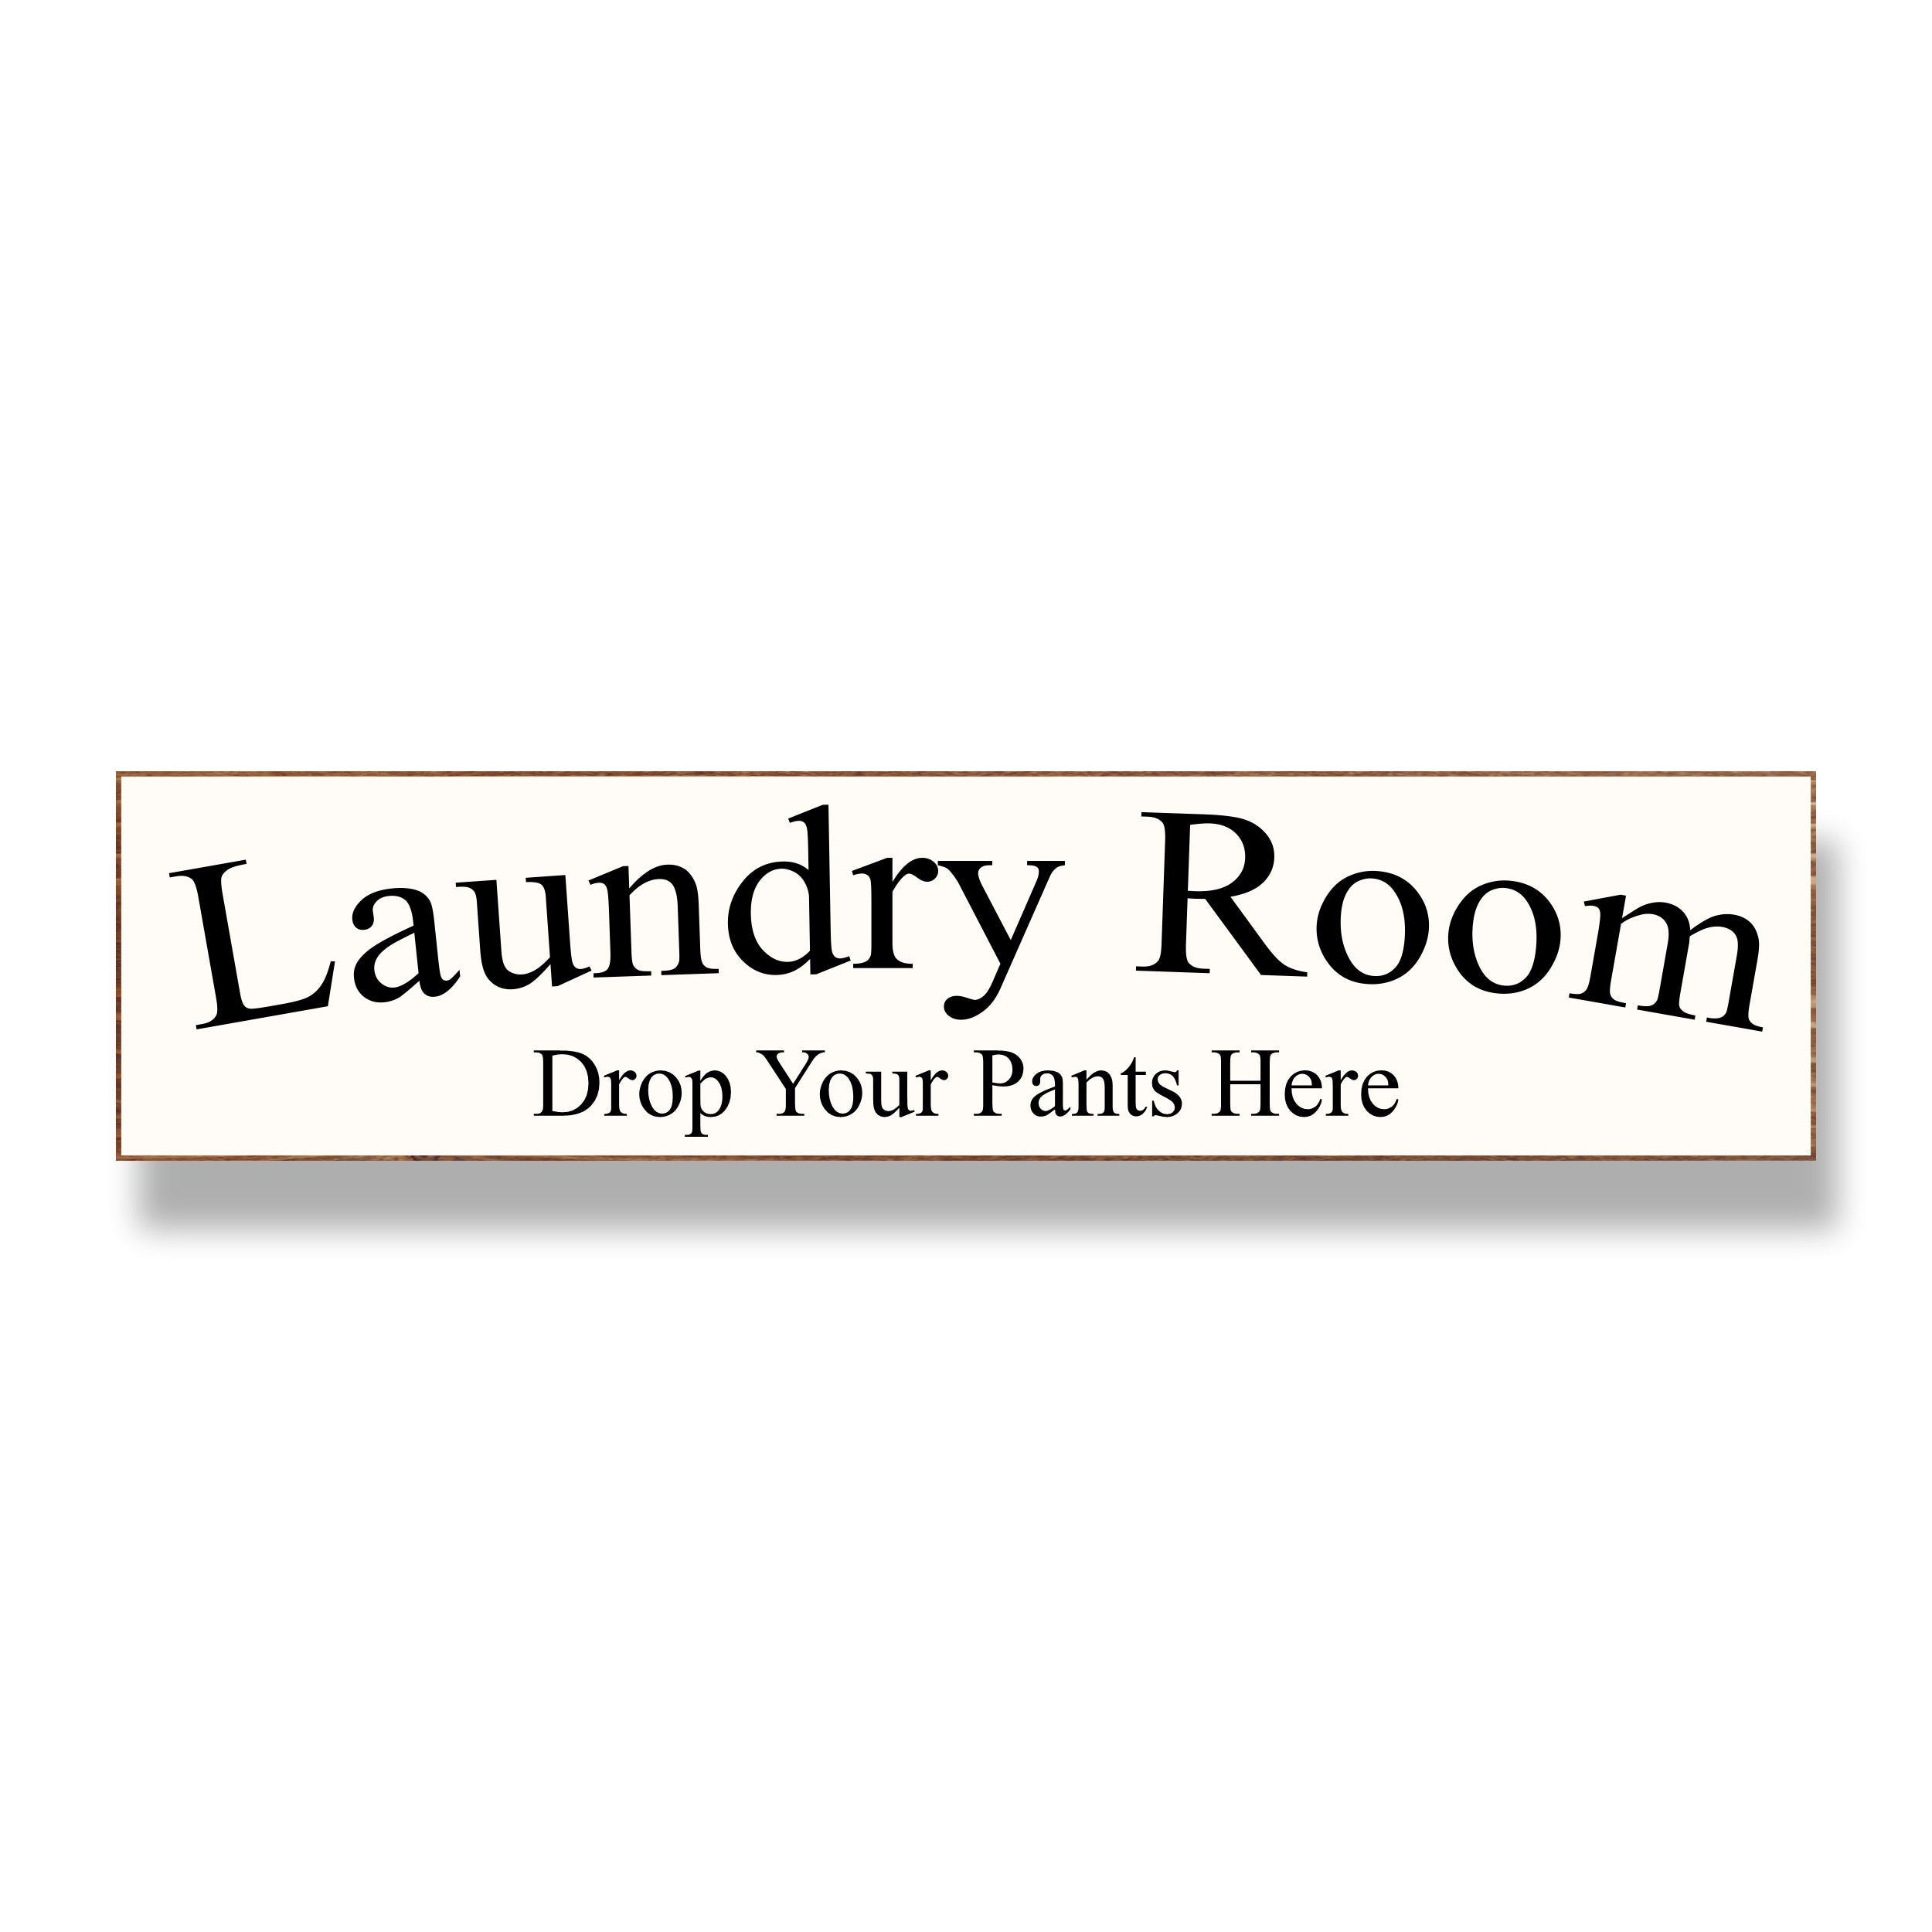 Laundry Room - Drop Your Pants Here Sign